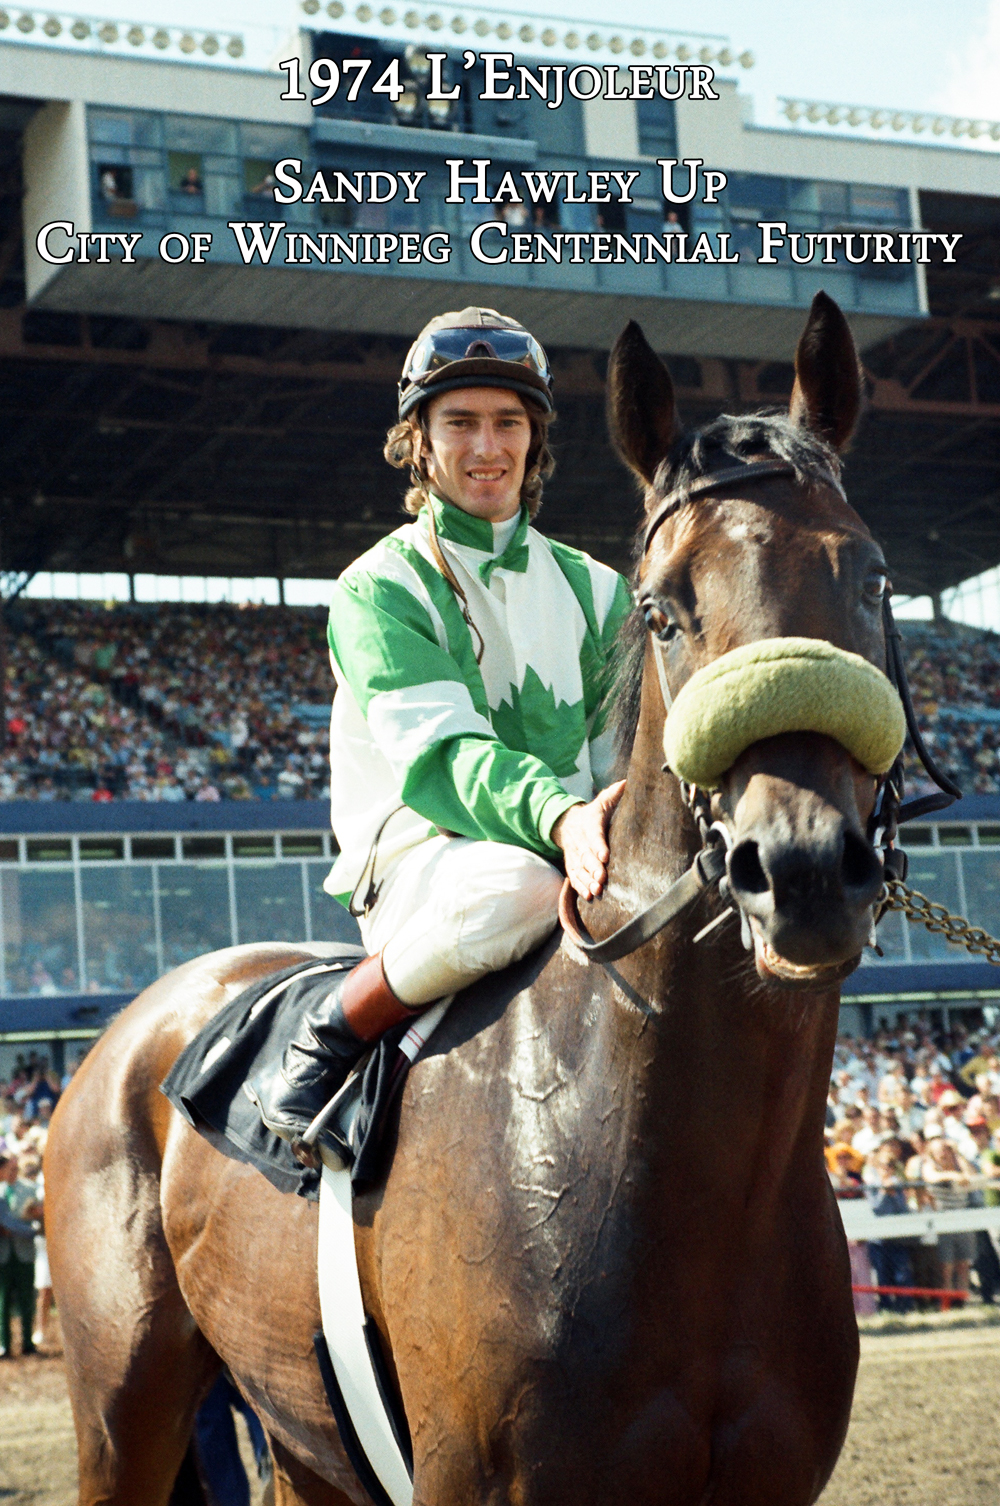 1974 Winnipeg Futurity winner L'Enjoleur went on to win the Queen's Plate and the Manitoba Derby.